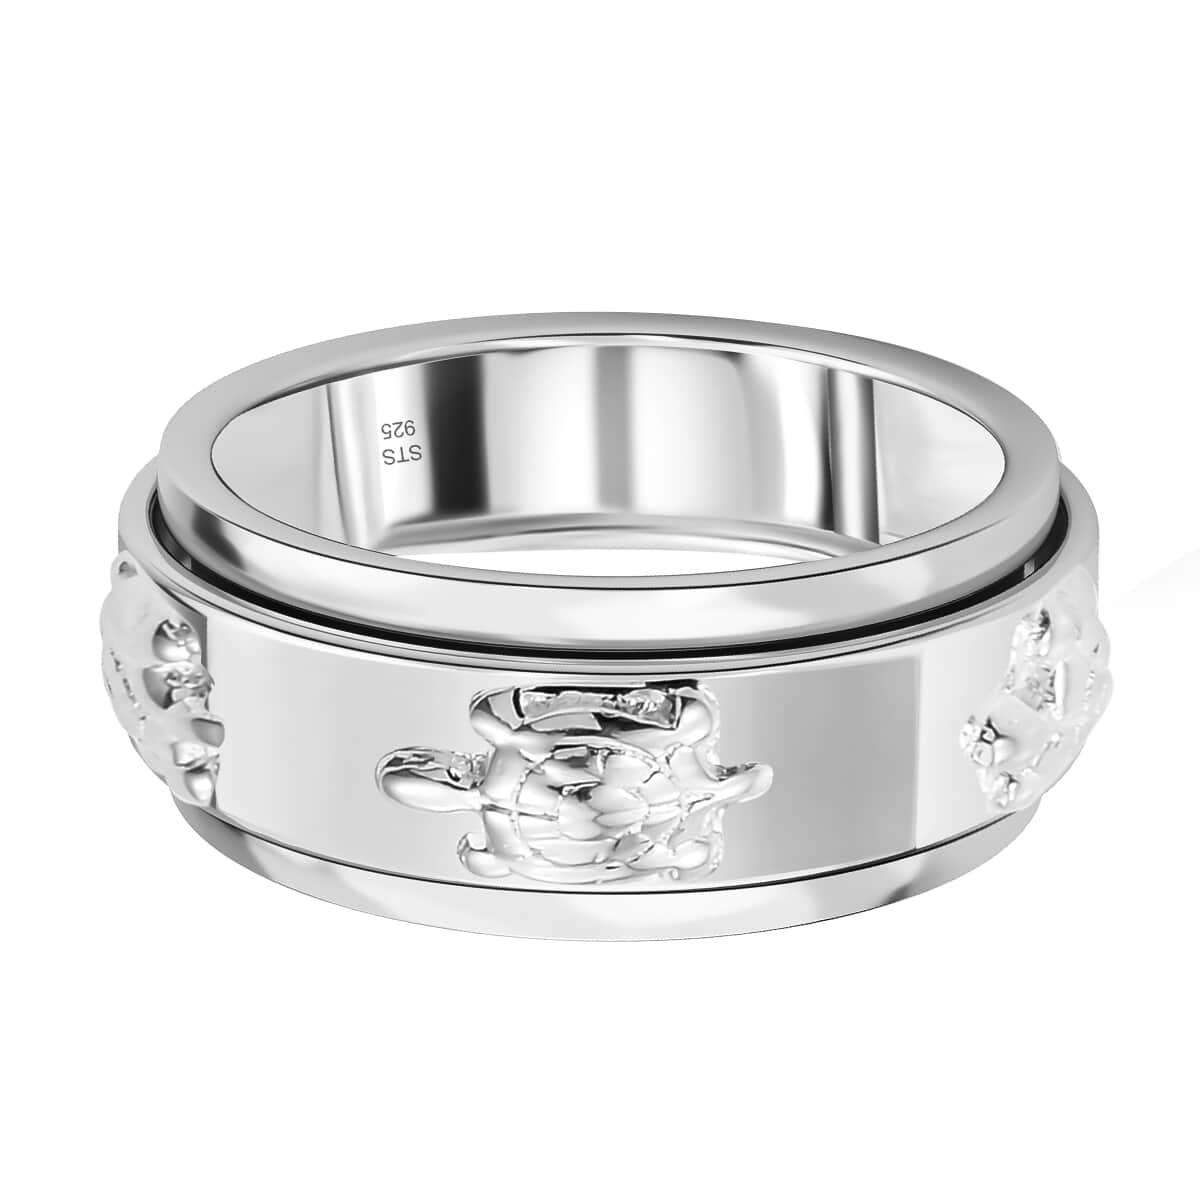 Turtle Band Spinner Ring in Sterling Silver, Anxiety Ring for Women, Fidget Rings for Anxiety for Women, Stress Relieving Anxiety Ring, Promise Rings (Size 10.0) (5 g) image number 6